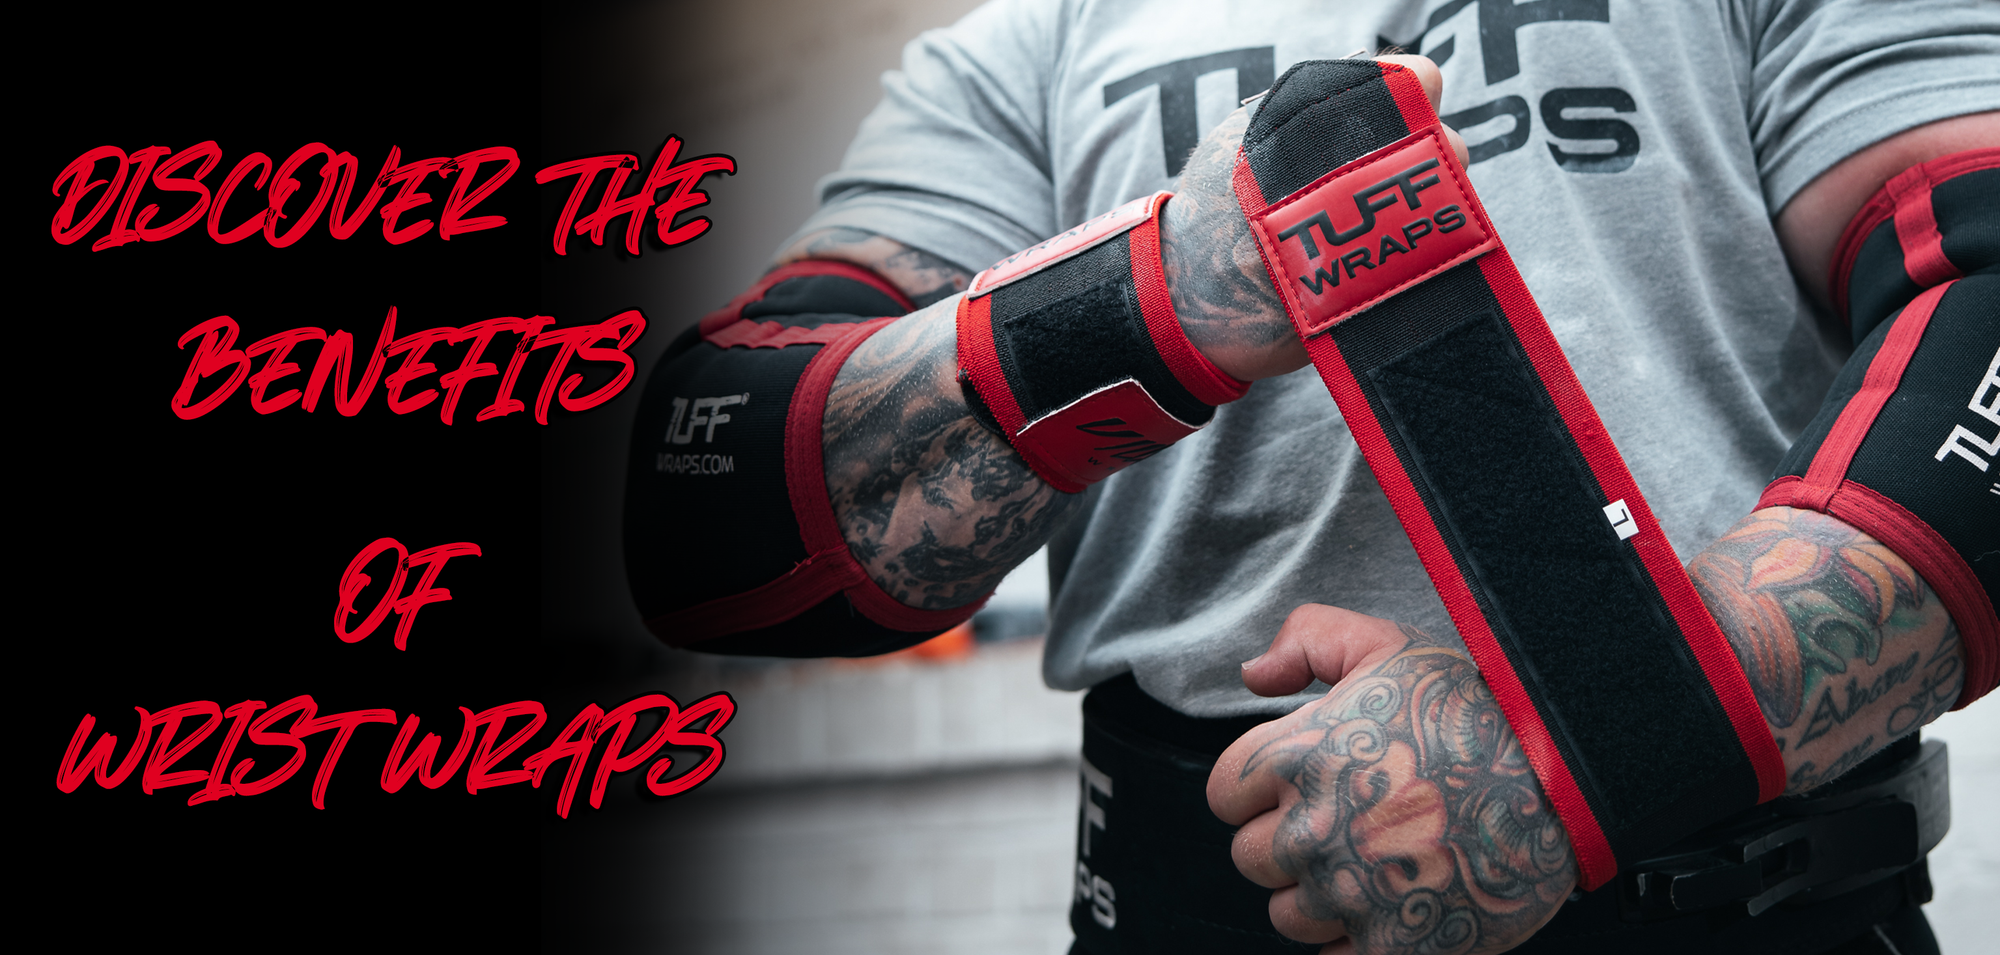 Discover the Benefits of Wrist Wraps: Get Ready to Take Your Workouts to the Next Level!